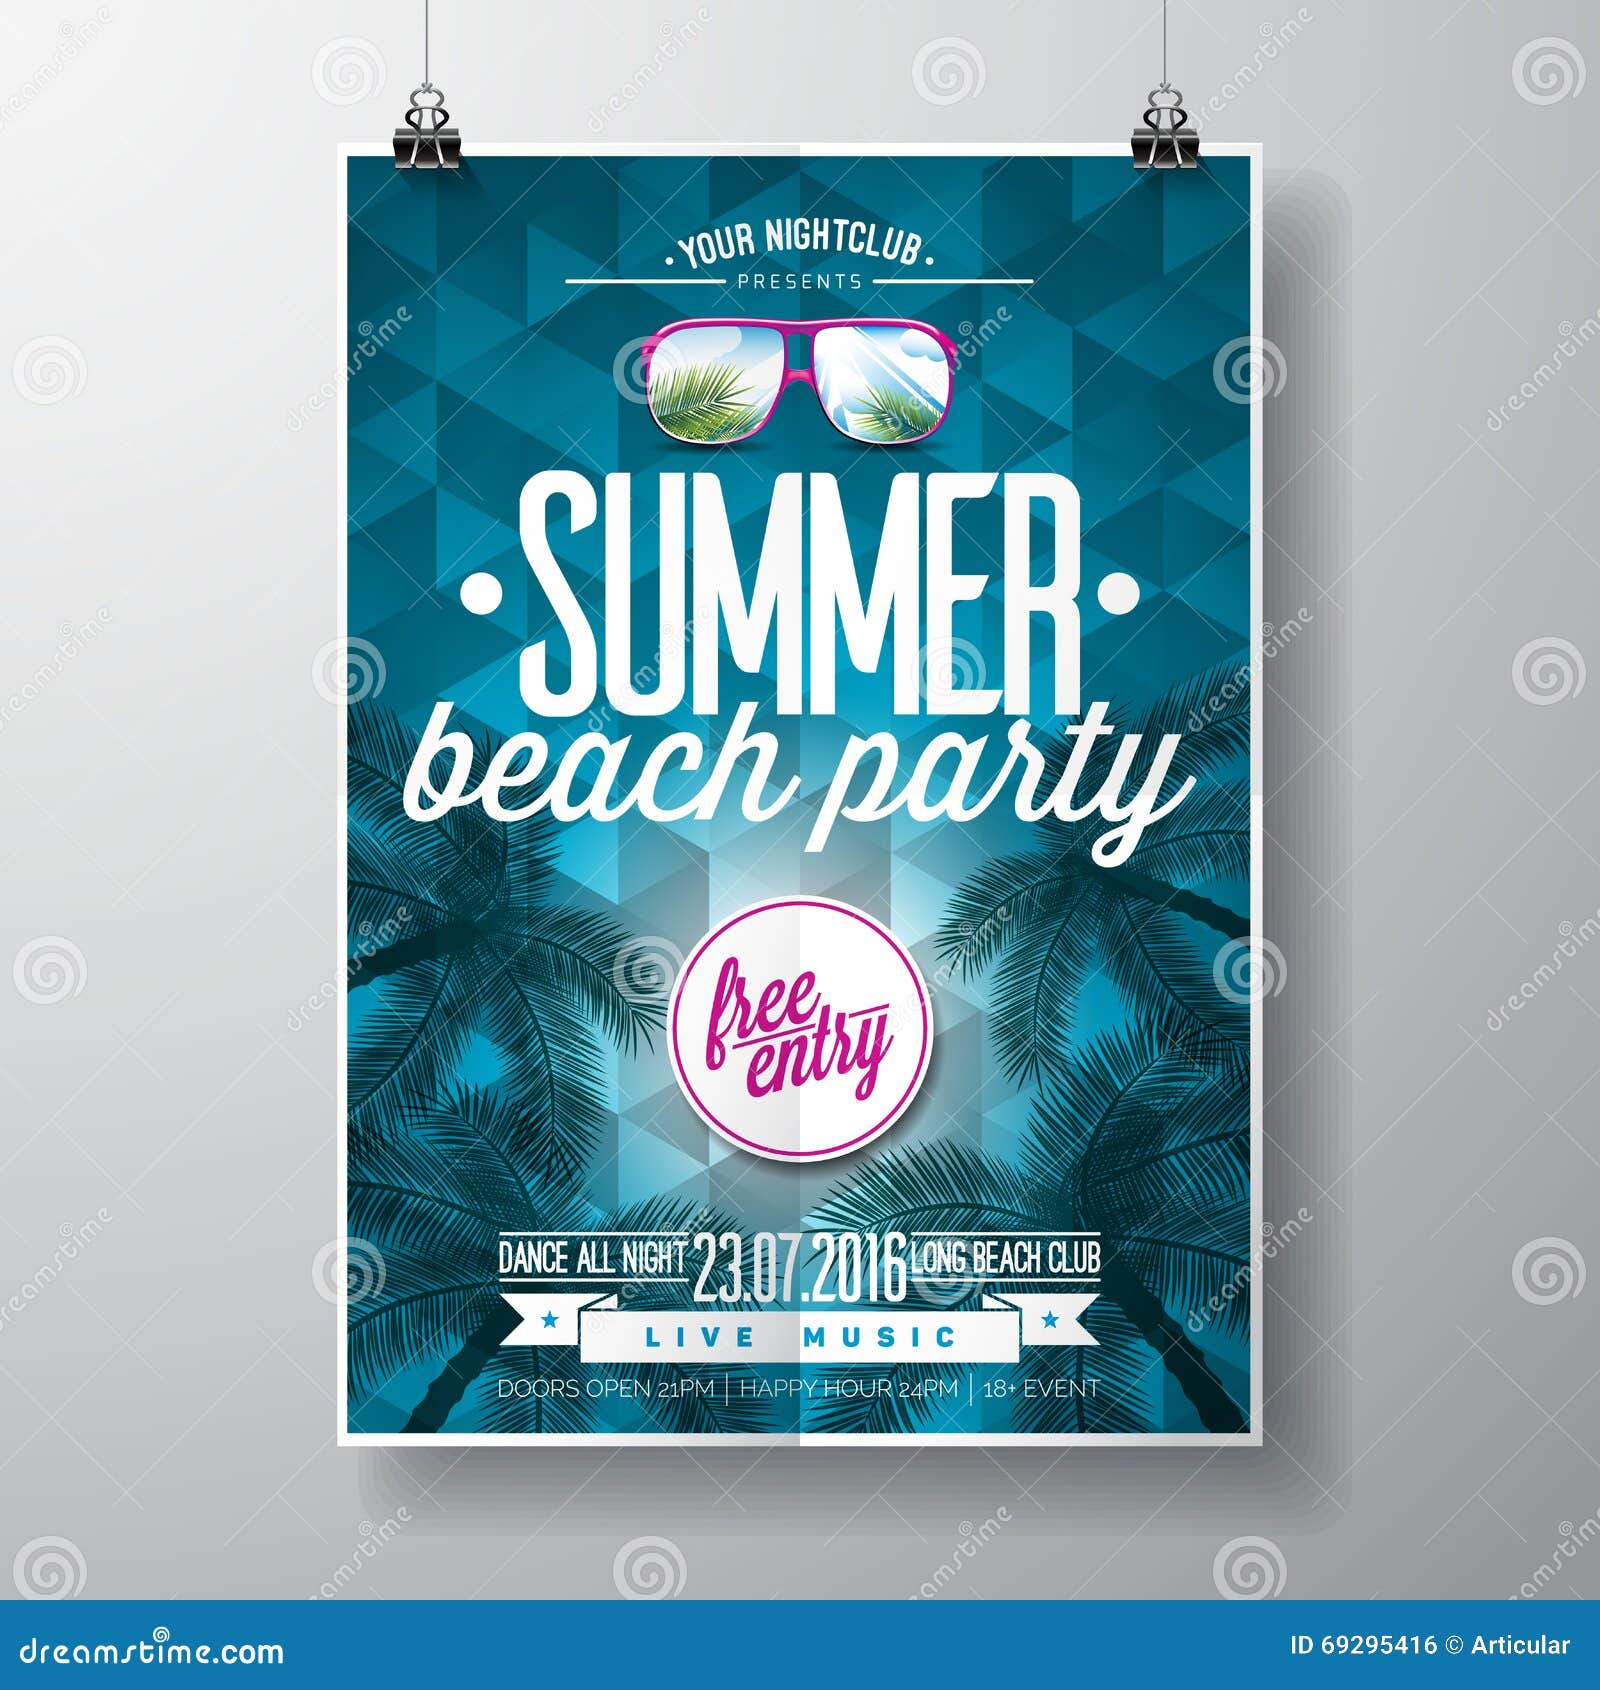 beach party background clipart blue